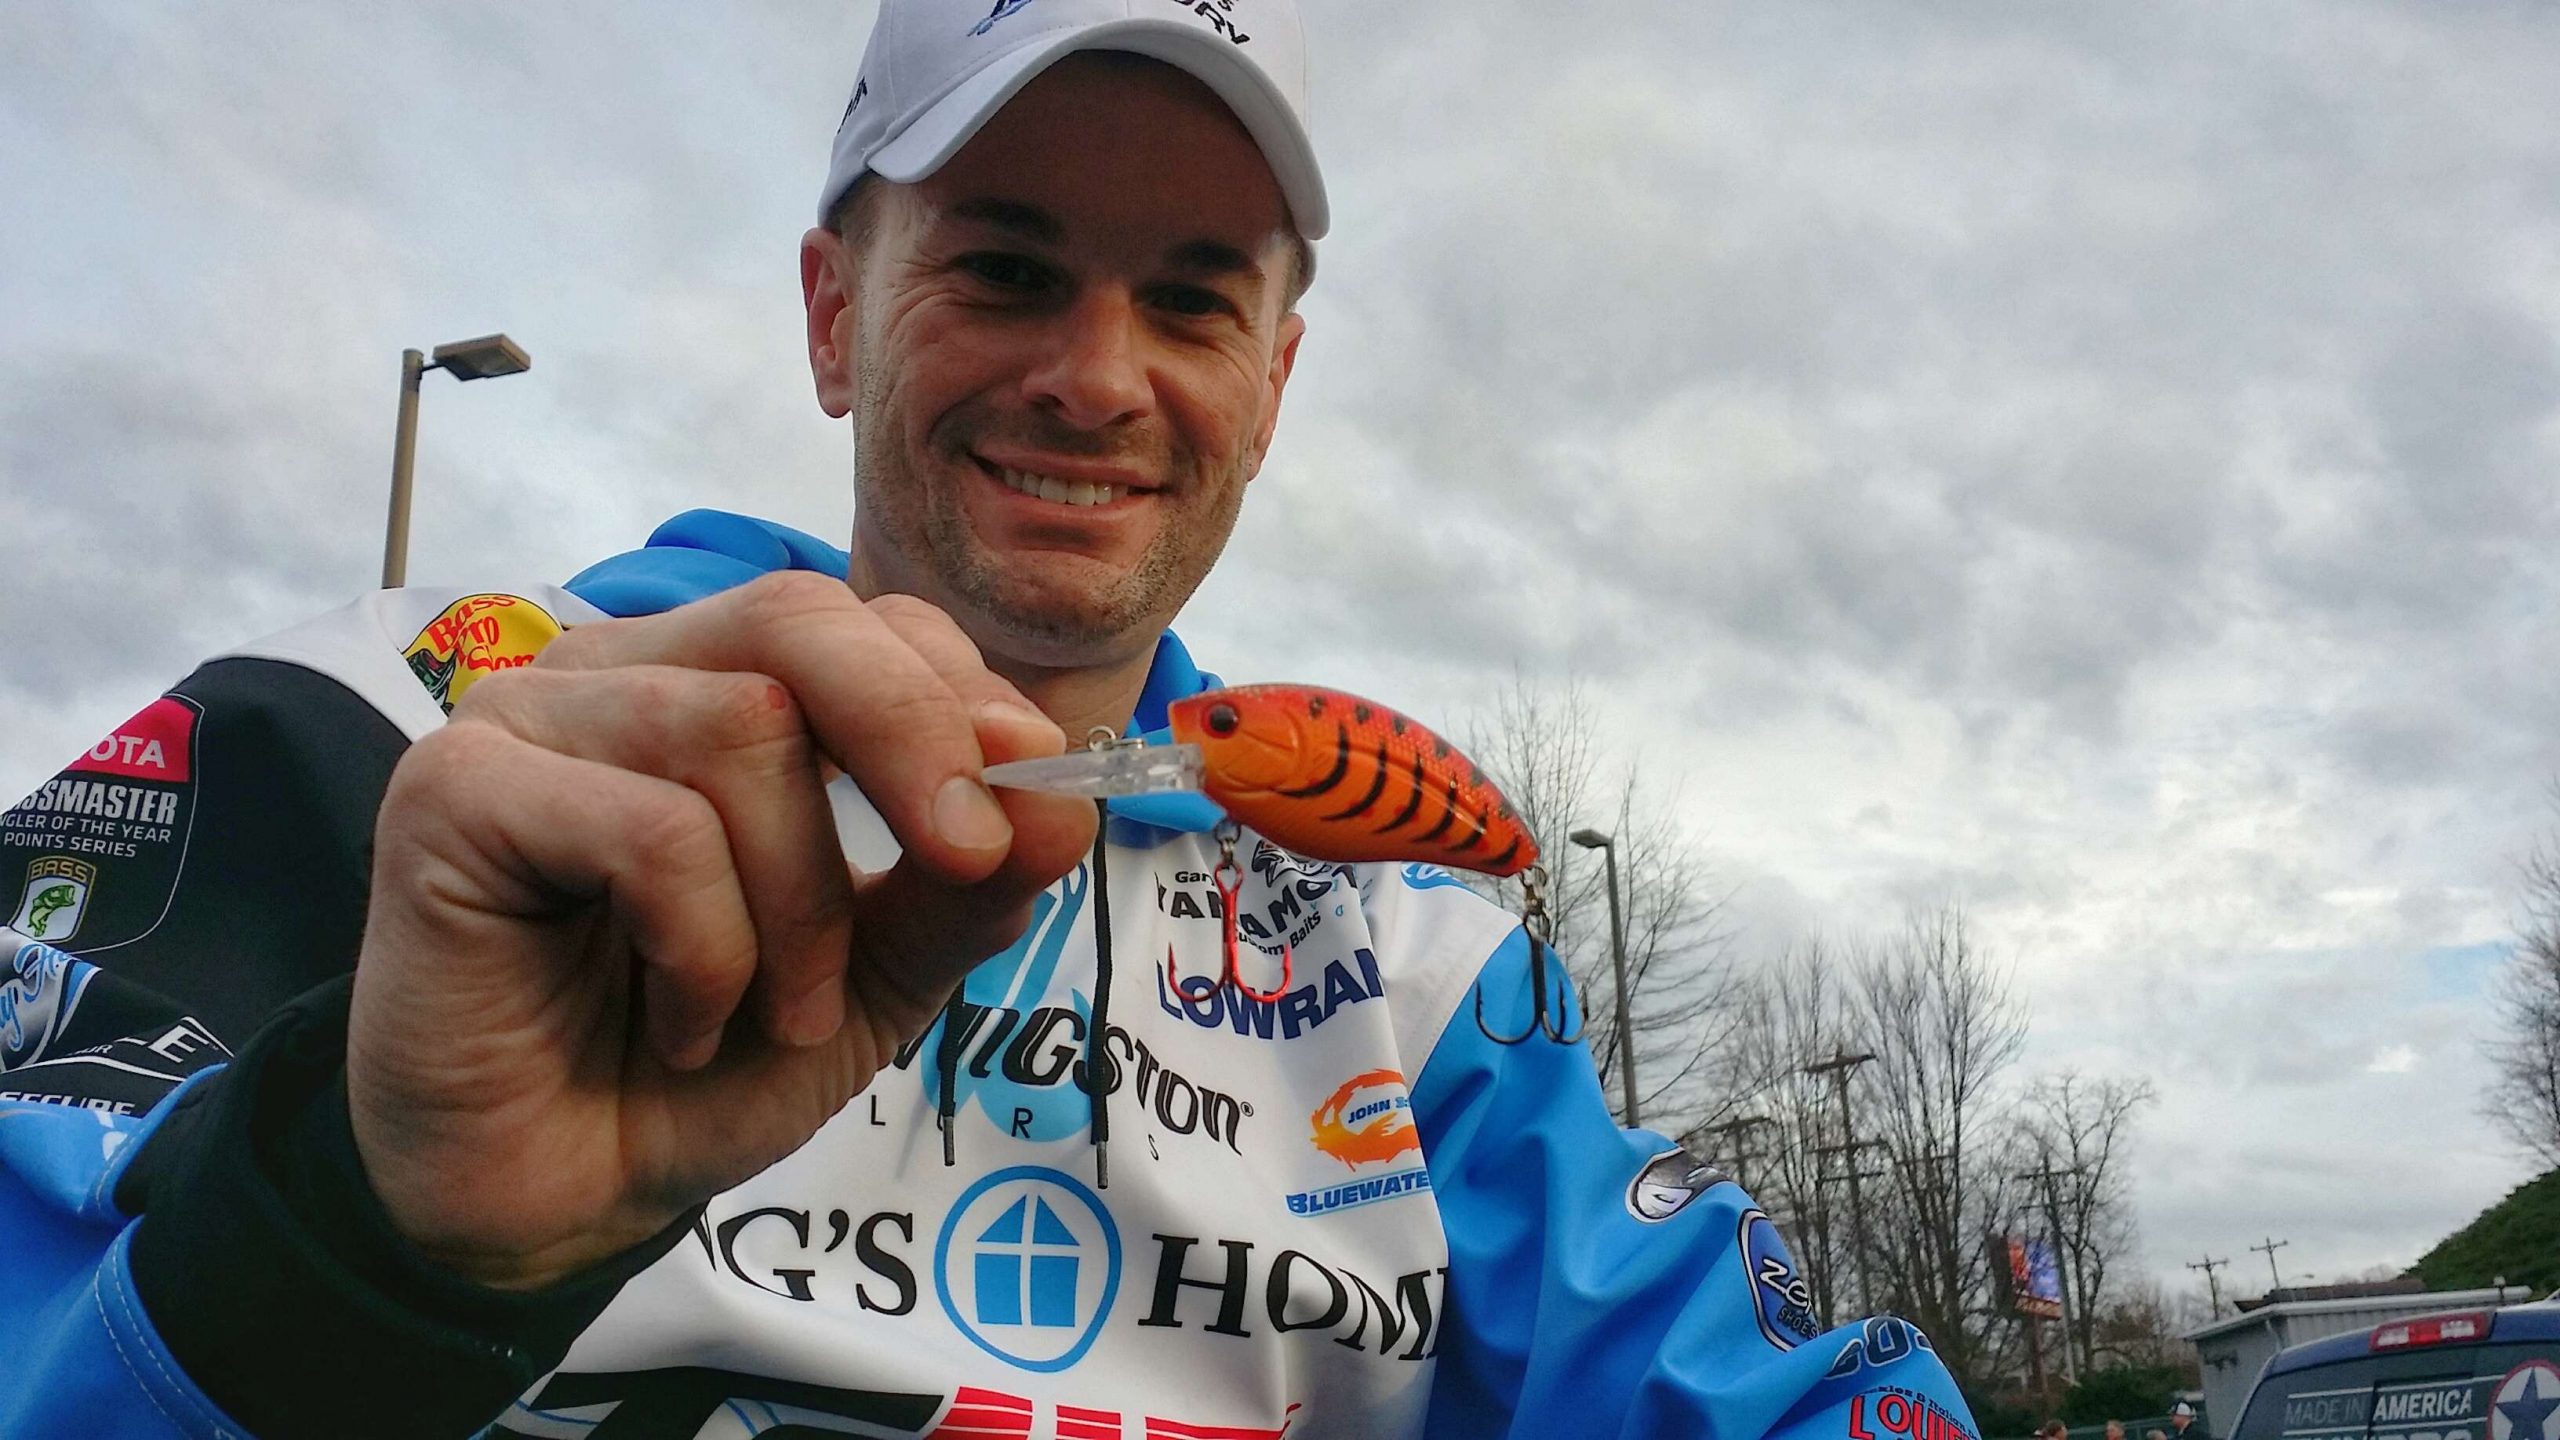 Randy Howell was fishing the exact same way he won the last Classic: cranking riprap (mostly) with his signature Livingston Lures Howeller crankbait (Guntersville craw). He fished up the Seneca River. The keys were fishing slowly, and paralleling the riprap to hit the bigger rocks in 8-10 feet.